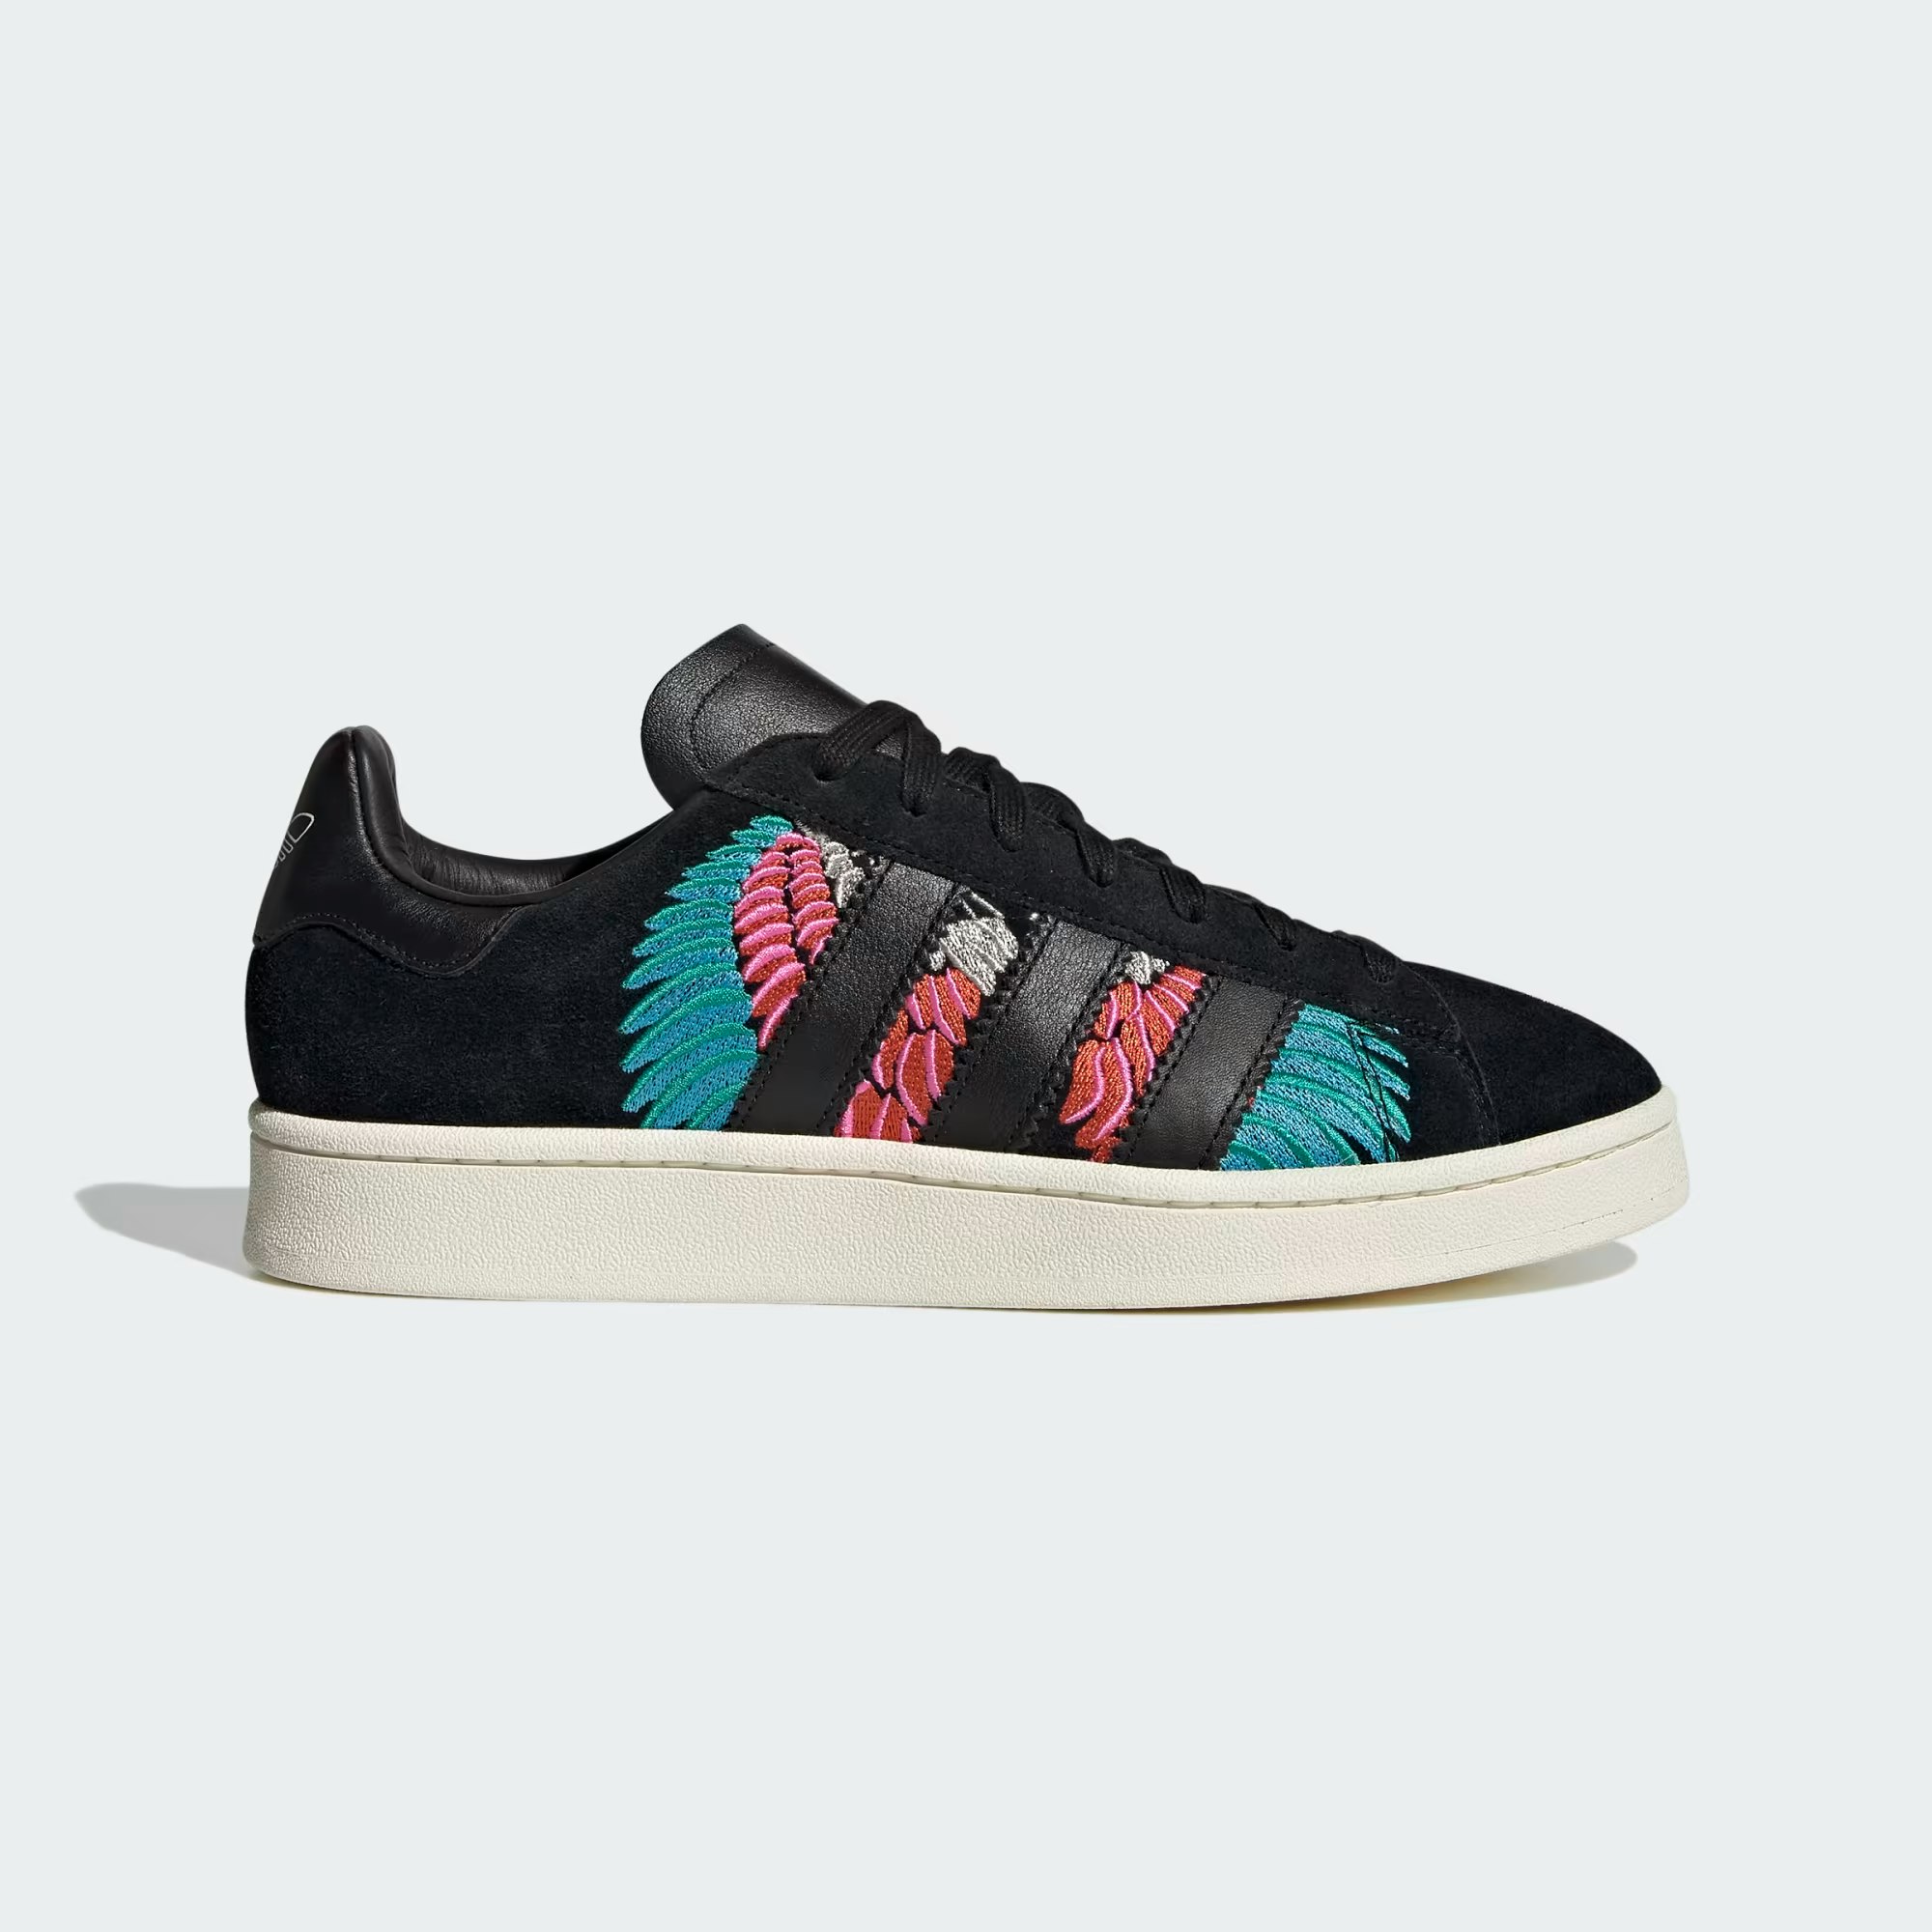 Notting Hill Carnival x adidas Campus 00s "Core Black"